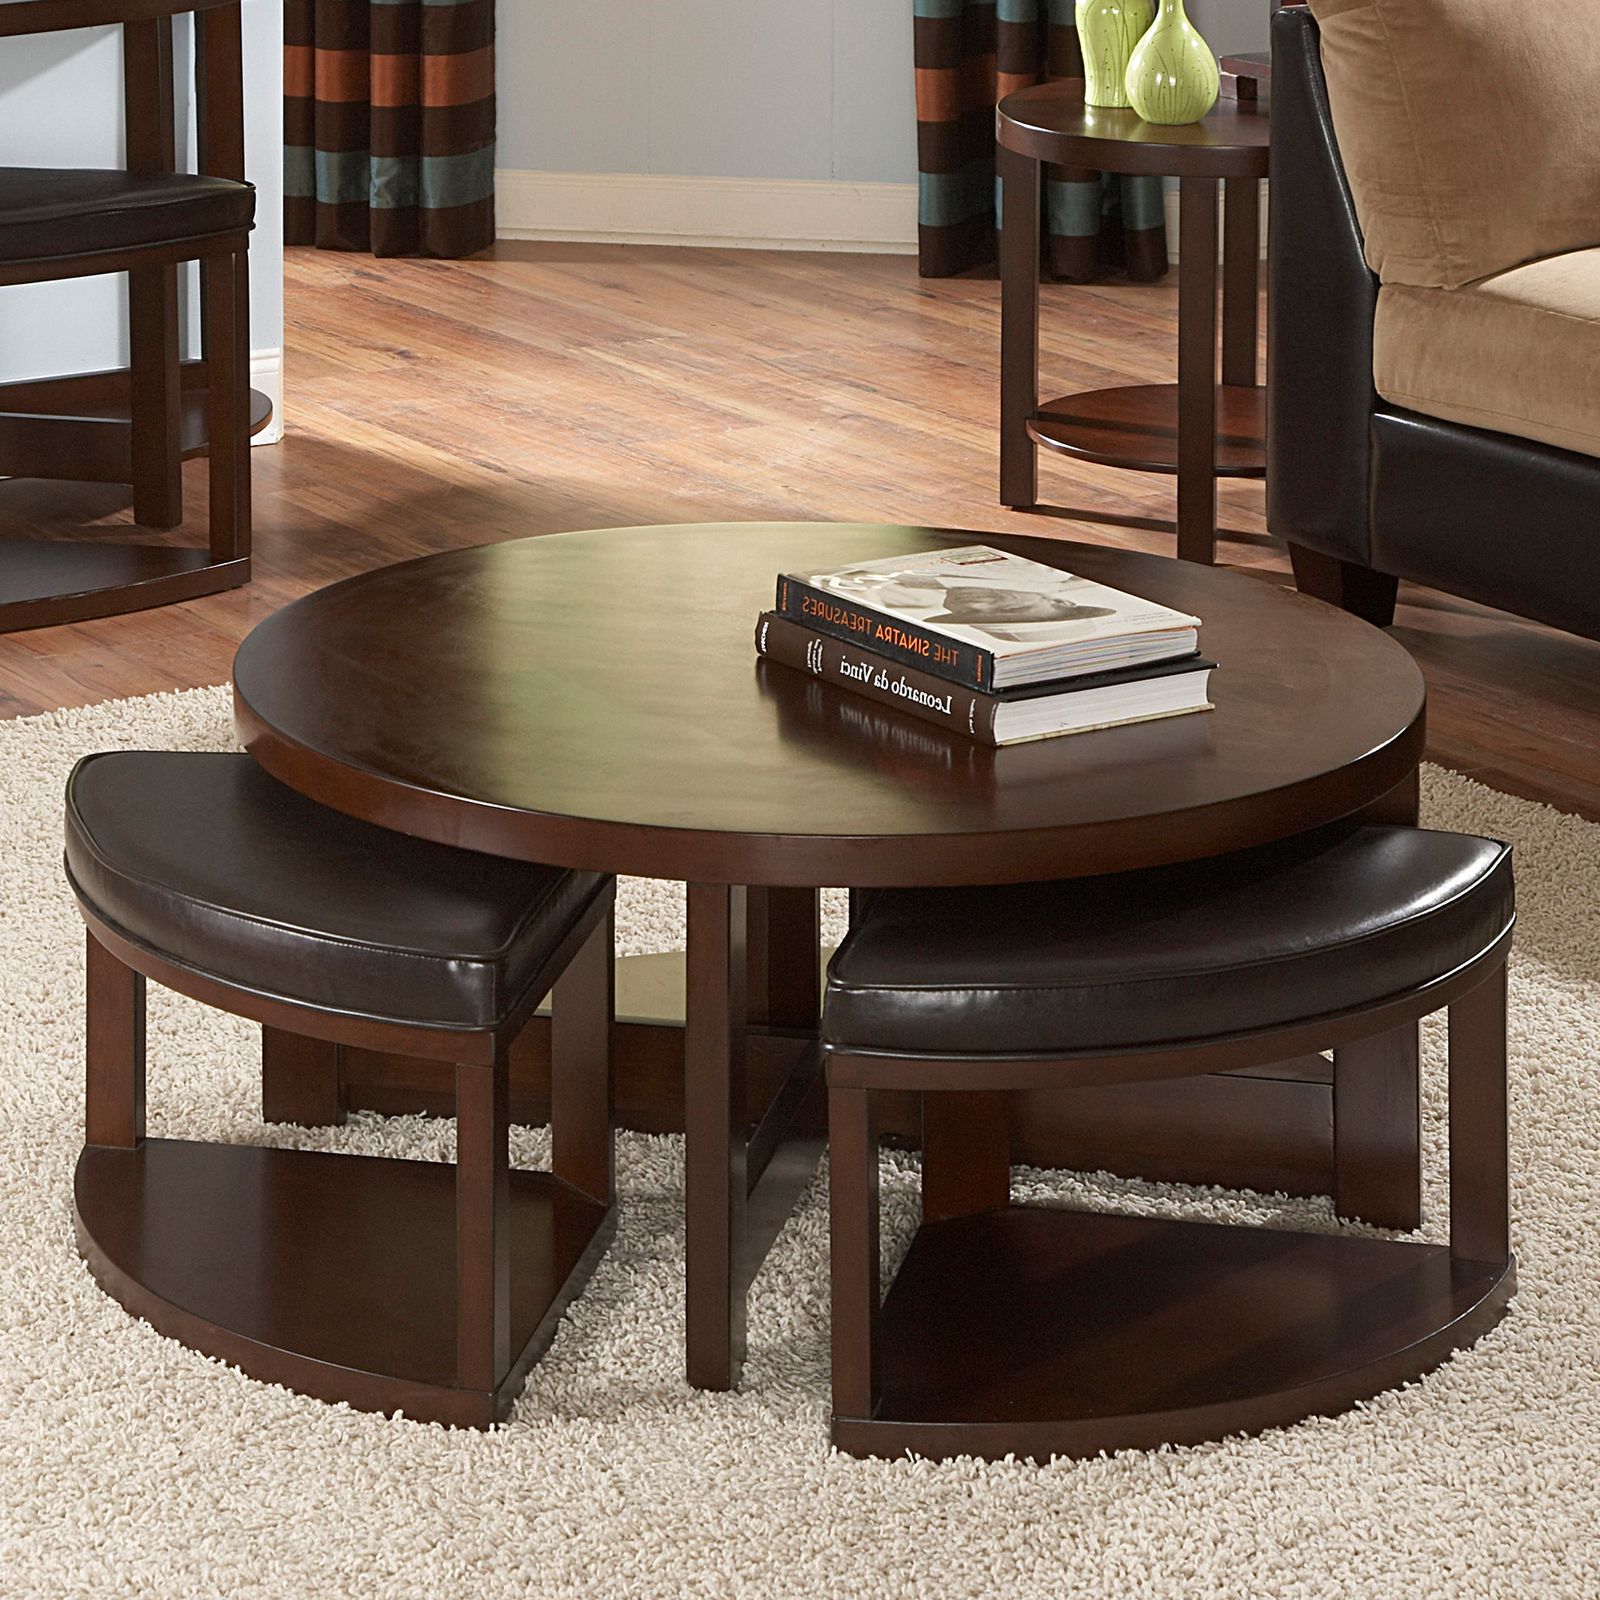 Homelegance Brussel Ii Round Brown Cherry Wood Coffee Table With 4 In Fashionable Espresso Wood Storage Coffee Tables (View 10 of 10)